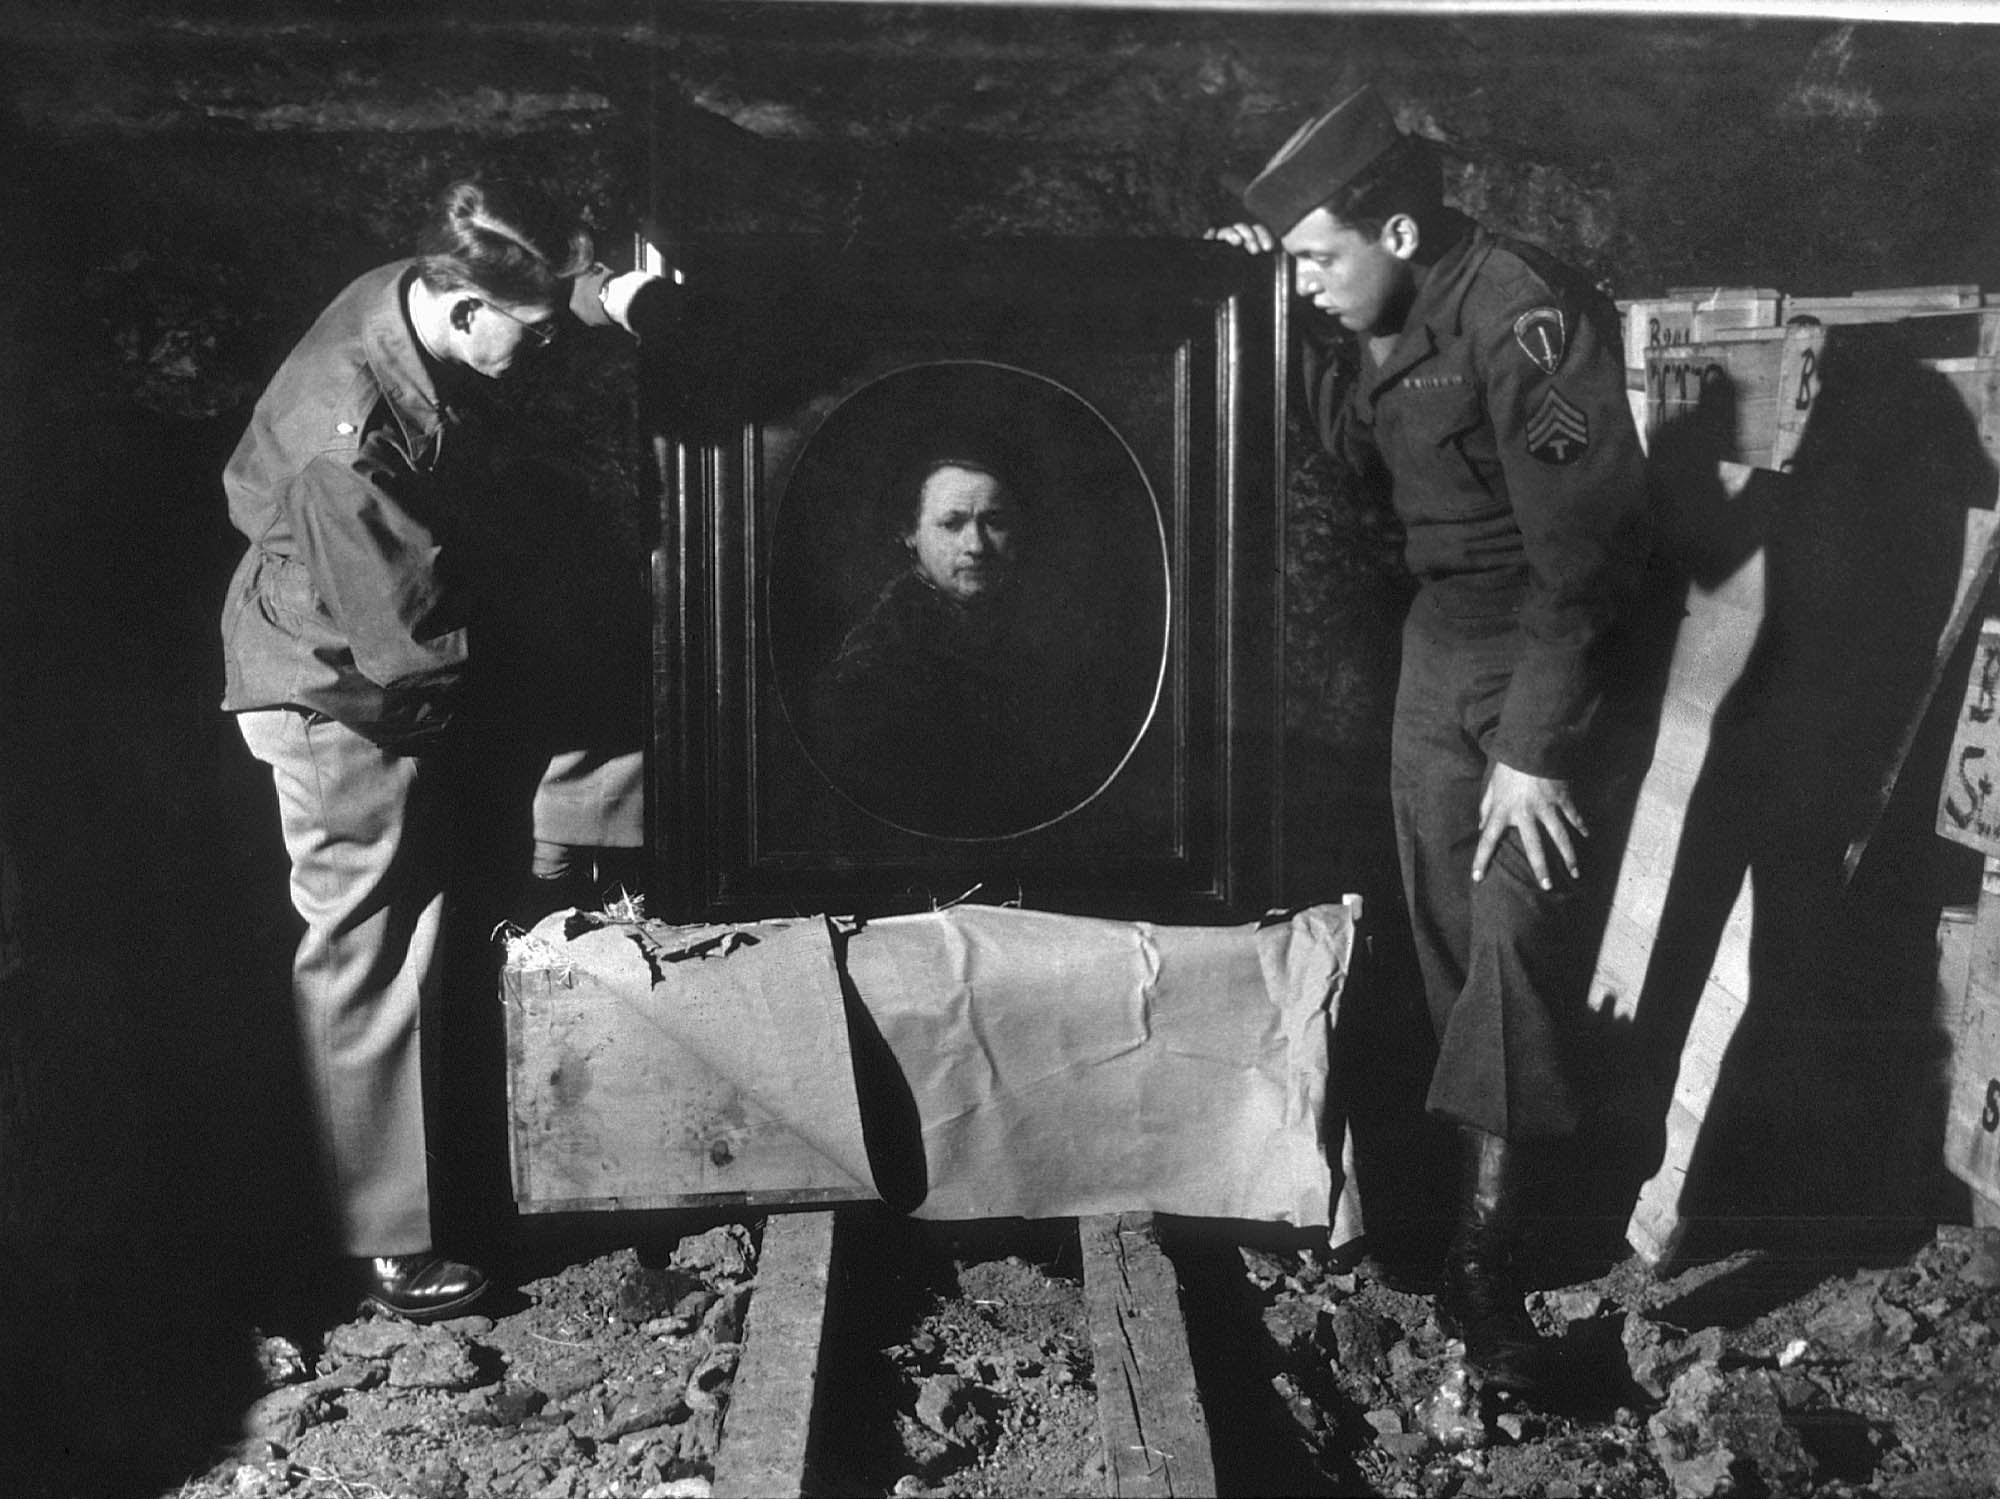 A US soldier inspects priceless art taken from Jews by the Nazis and stashed in the Heilbronn salt mines in Germany, 3 May 1945. The treasures were uncovered by allied forces after the defeat of Nazi Germany